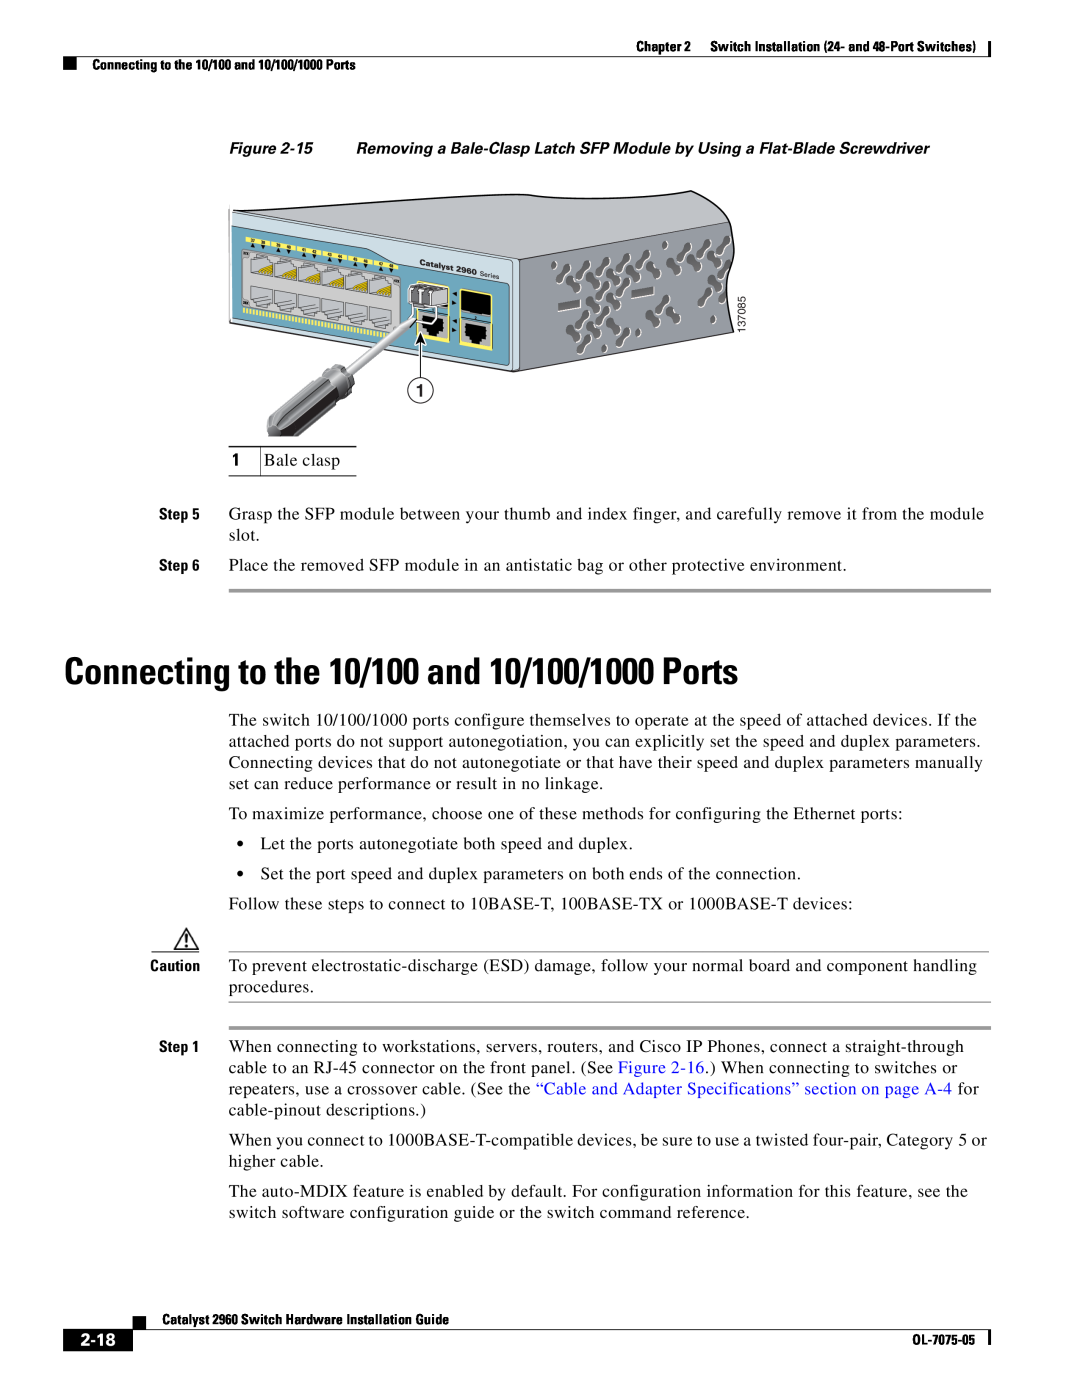 Cisco Systems 2960 specifications Connecting to the 10/100 and 10/100/1000 Ports, 2-18 